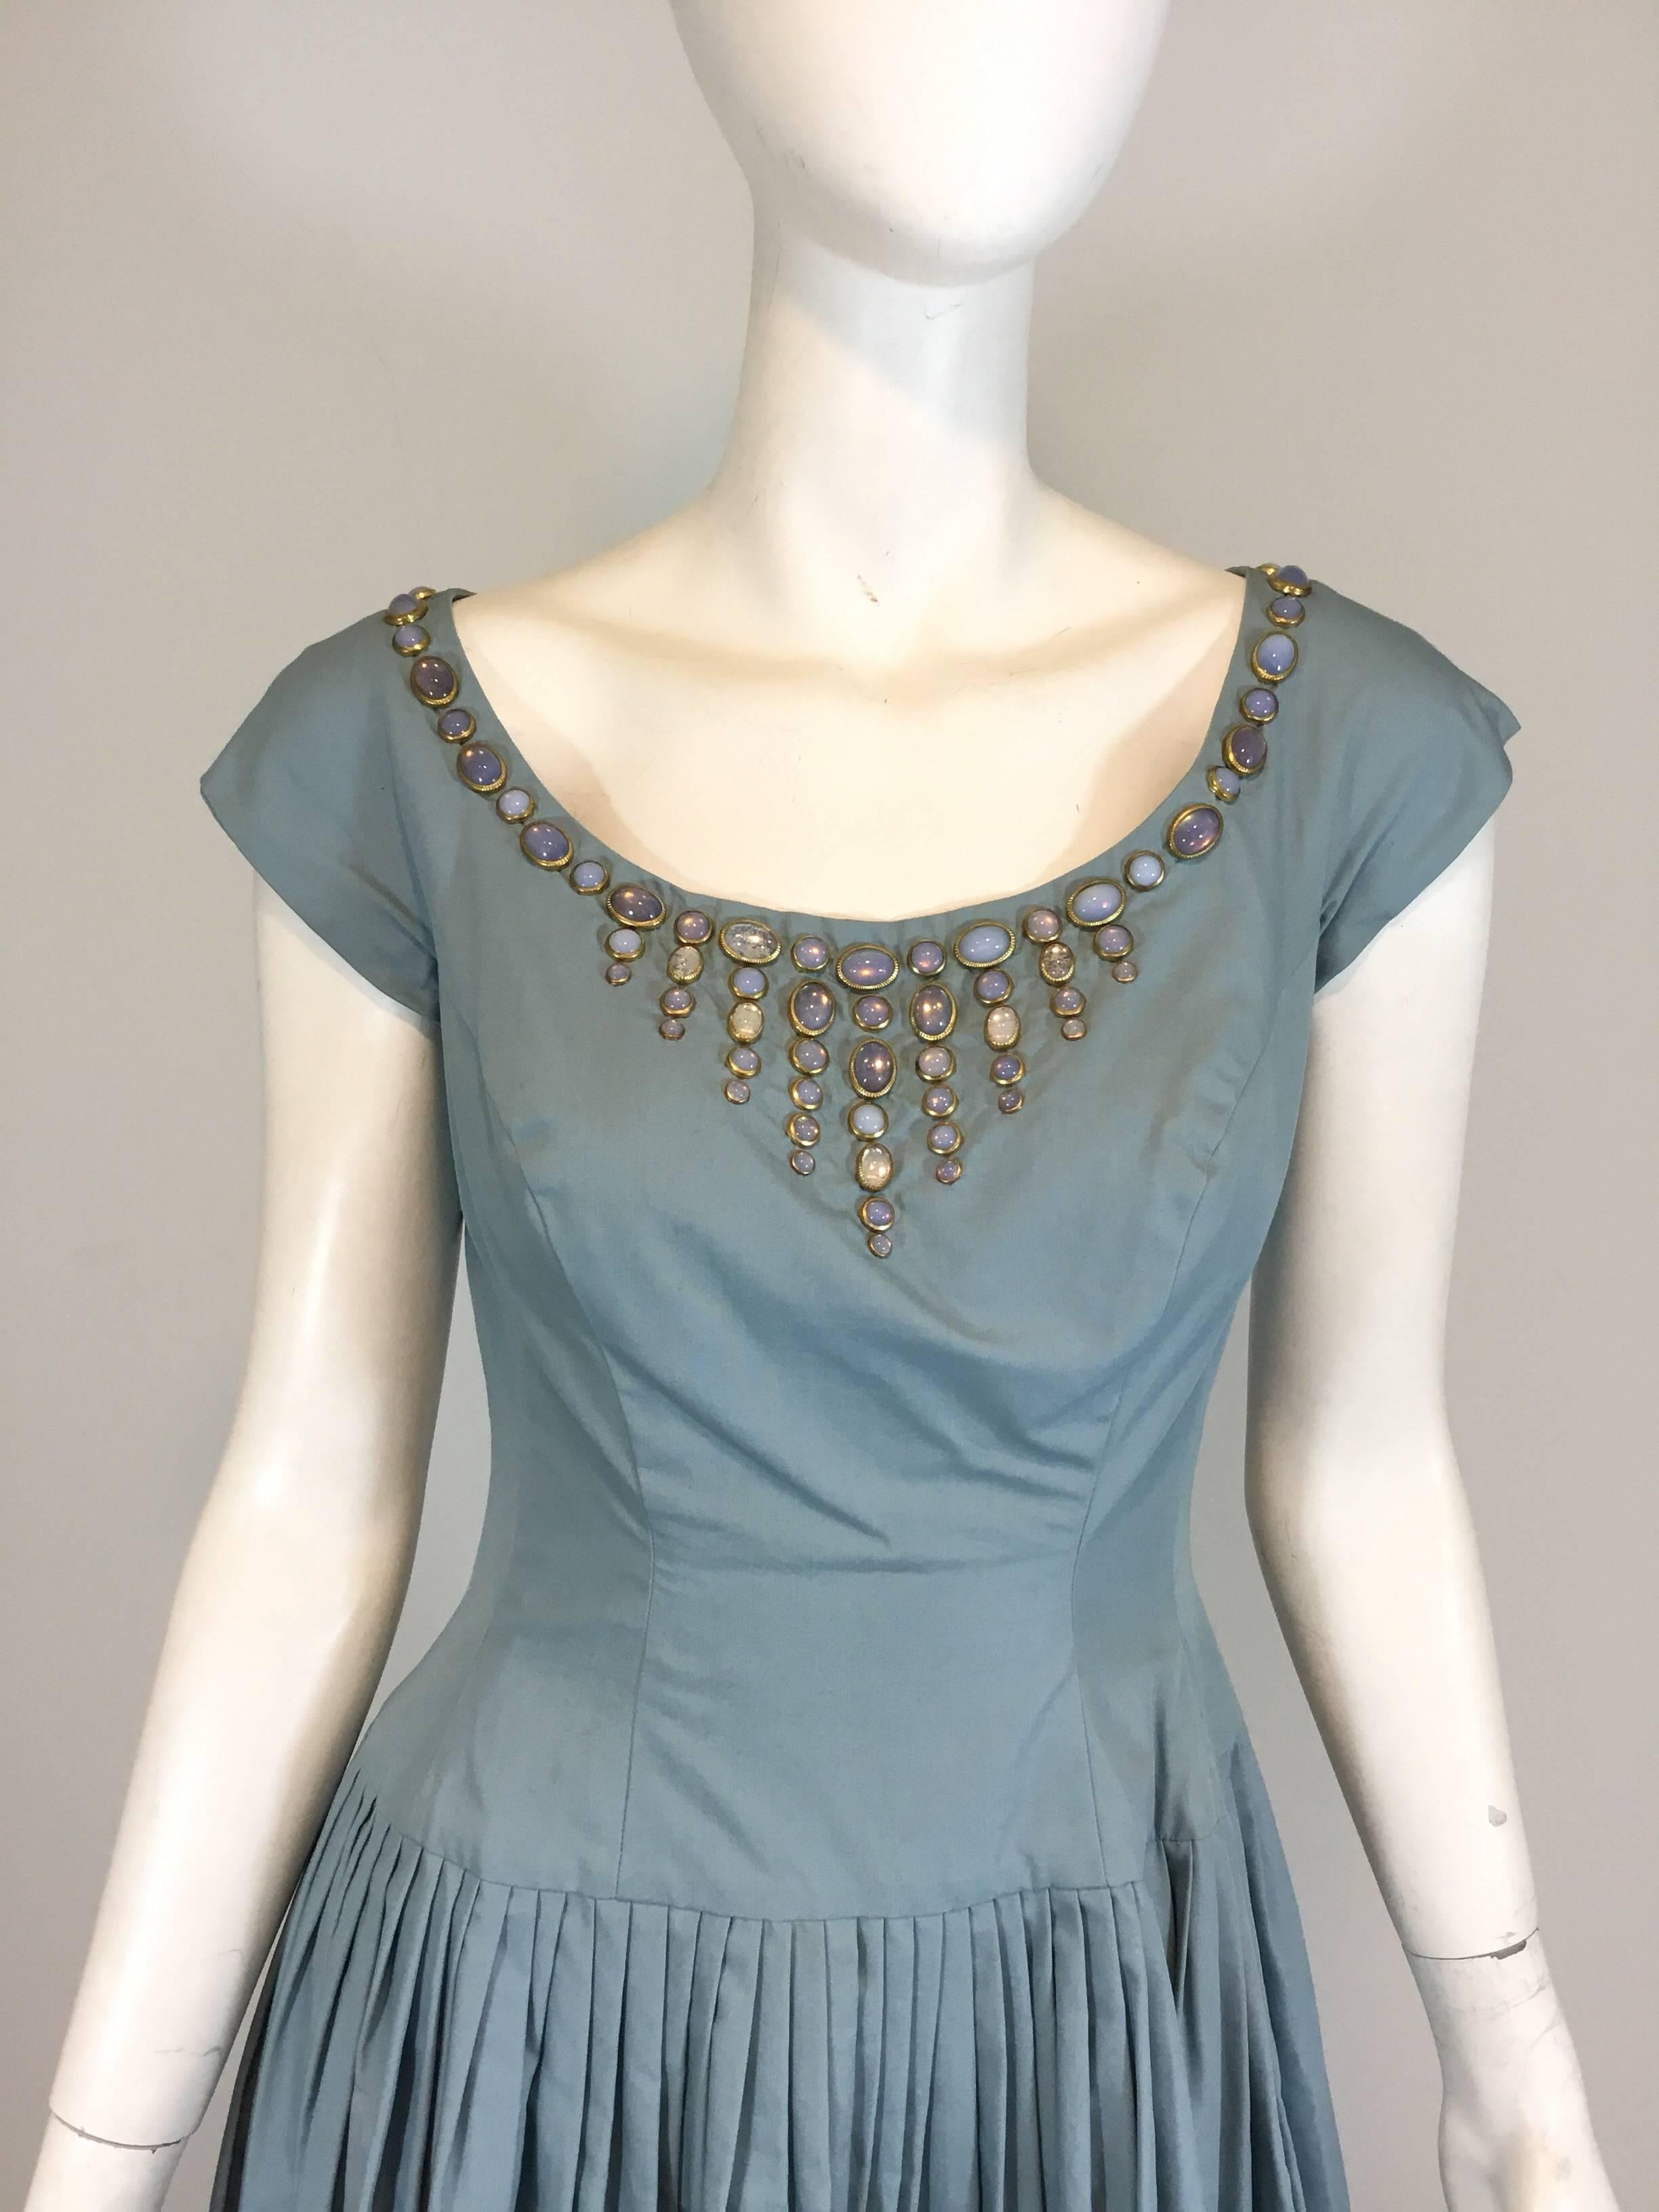 I. Magnin 1950's Vintage dress featured in a robins egg light blue with a faux moonstone jewel-embellished neckline, pintucked skirt, and a back zipper fastening. Jewels are set in goldstone metal and are a cabochon shape. Excellent